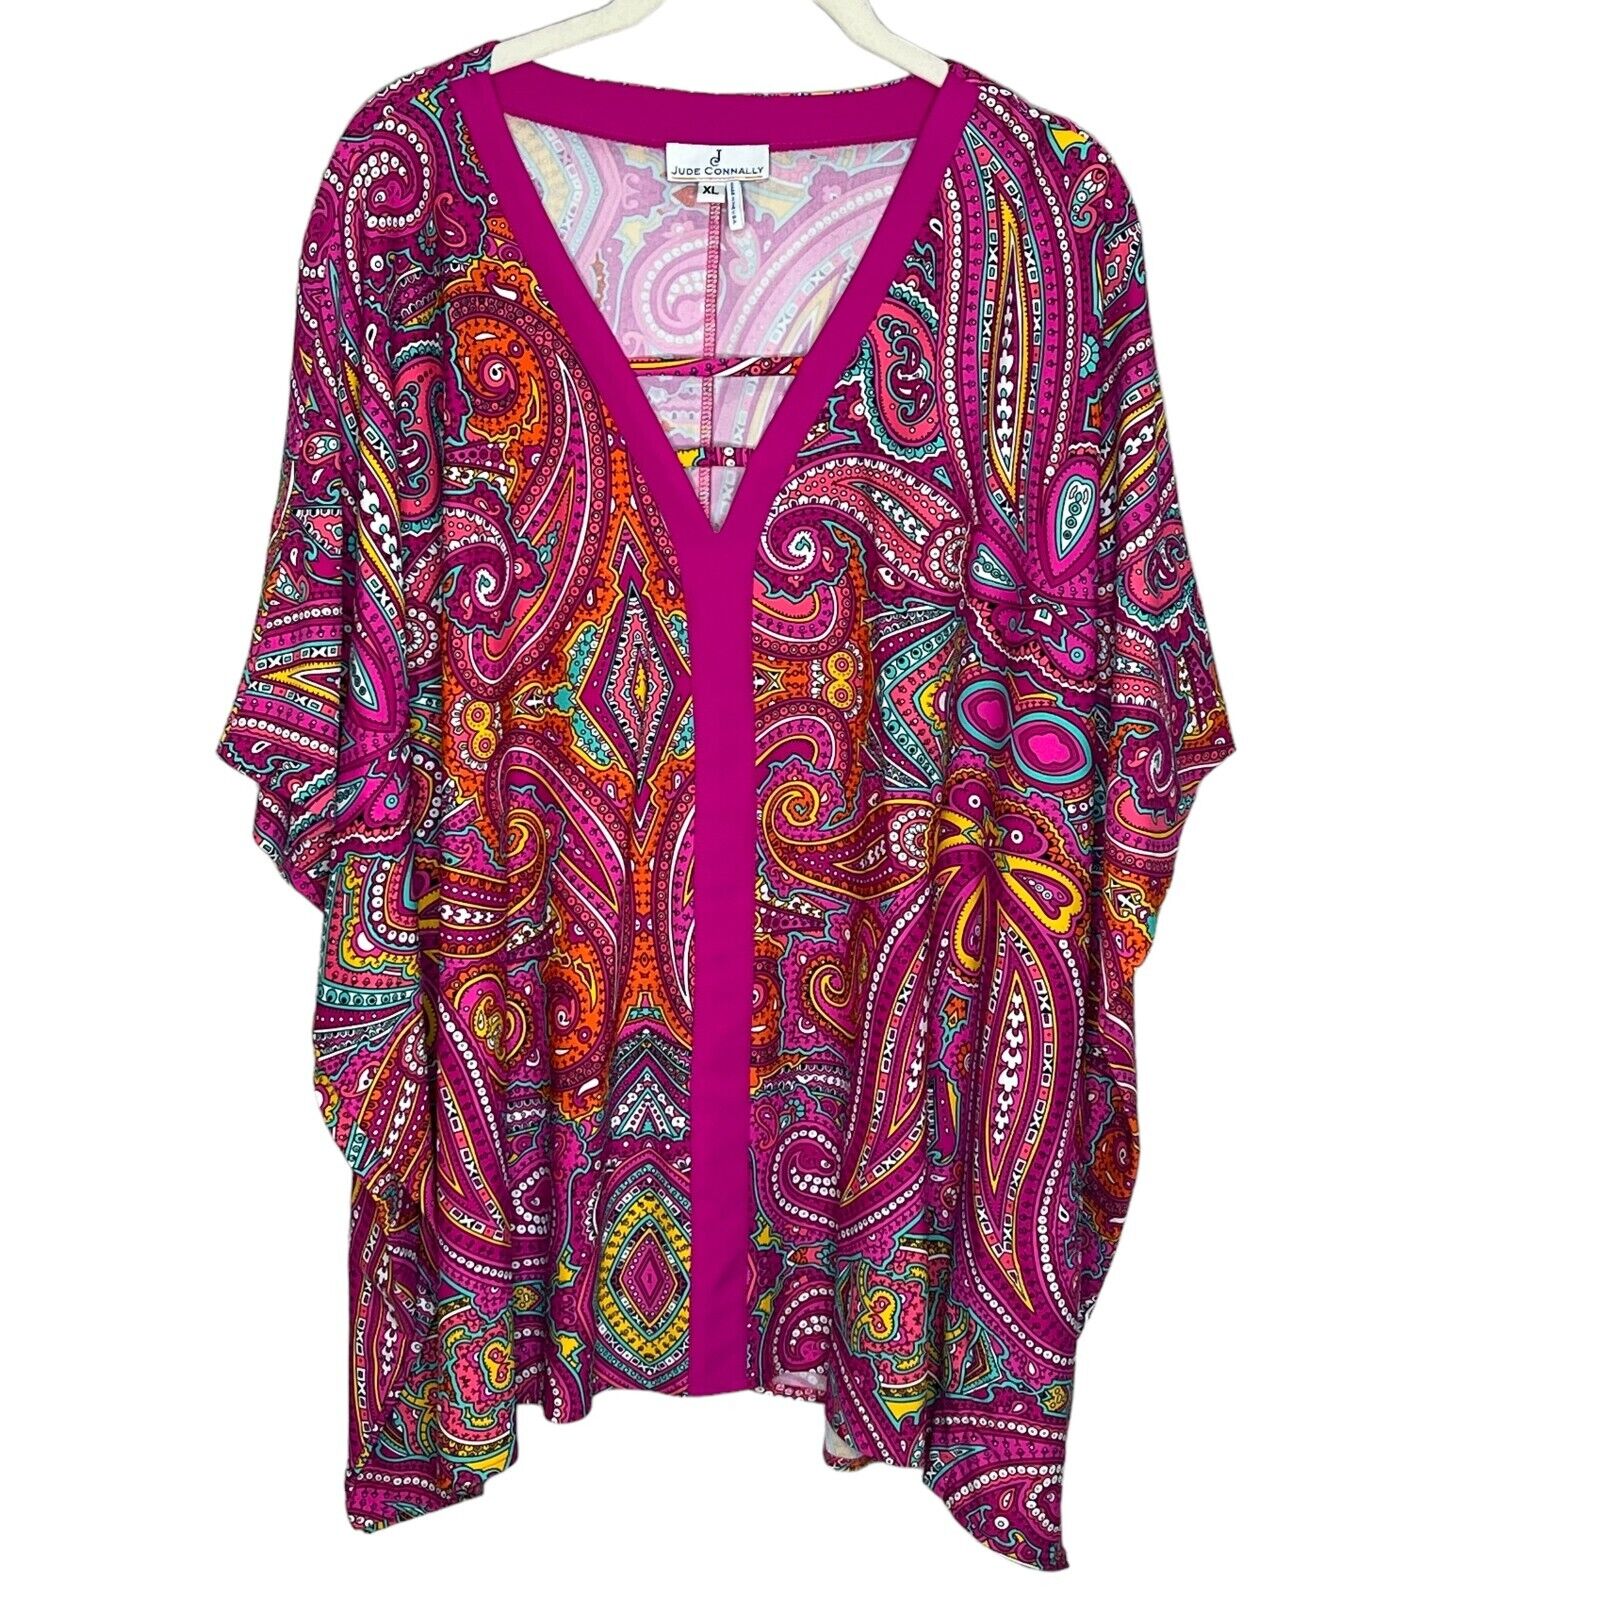 Jude Connally Pink Multicolor Paisley Top Size XL